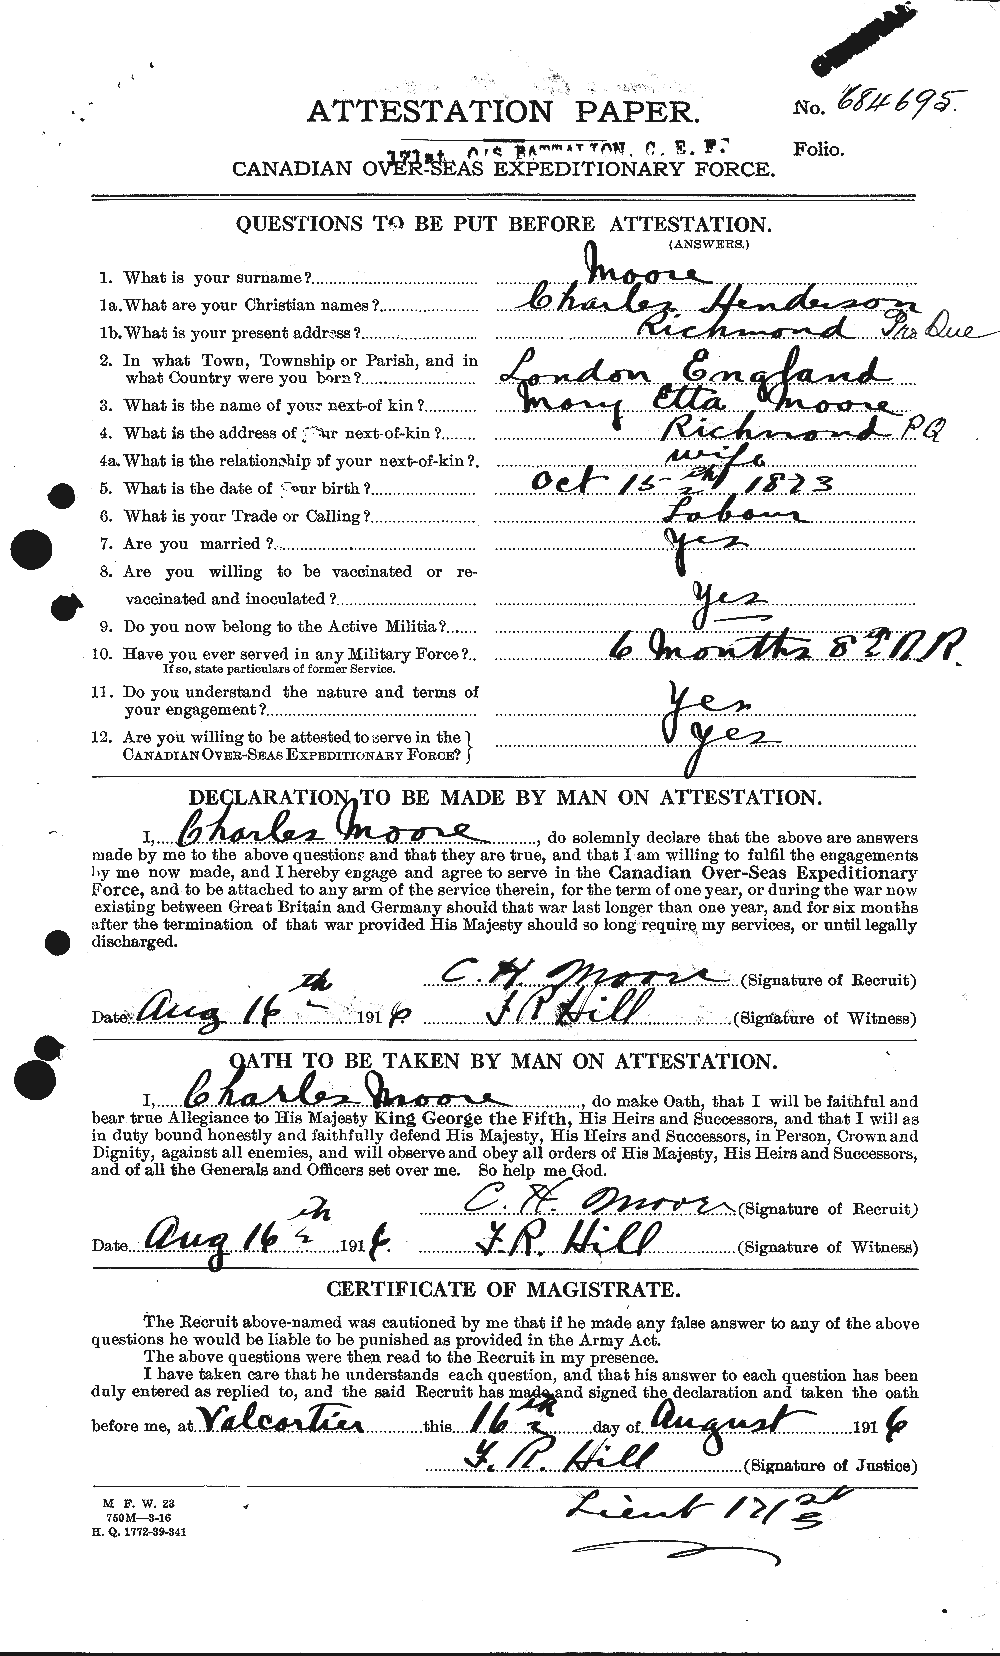 Personnel Records of the First World War - CEF 506509a